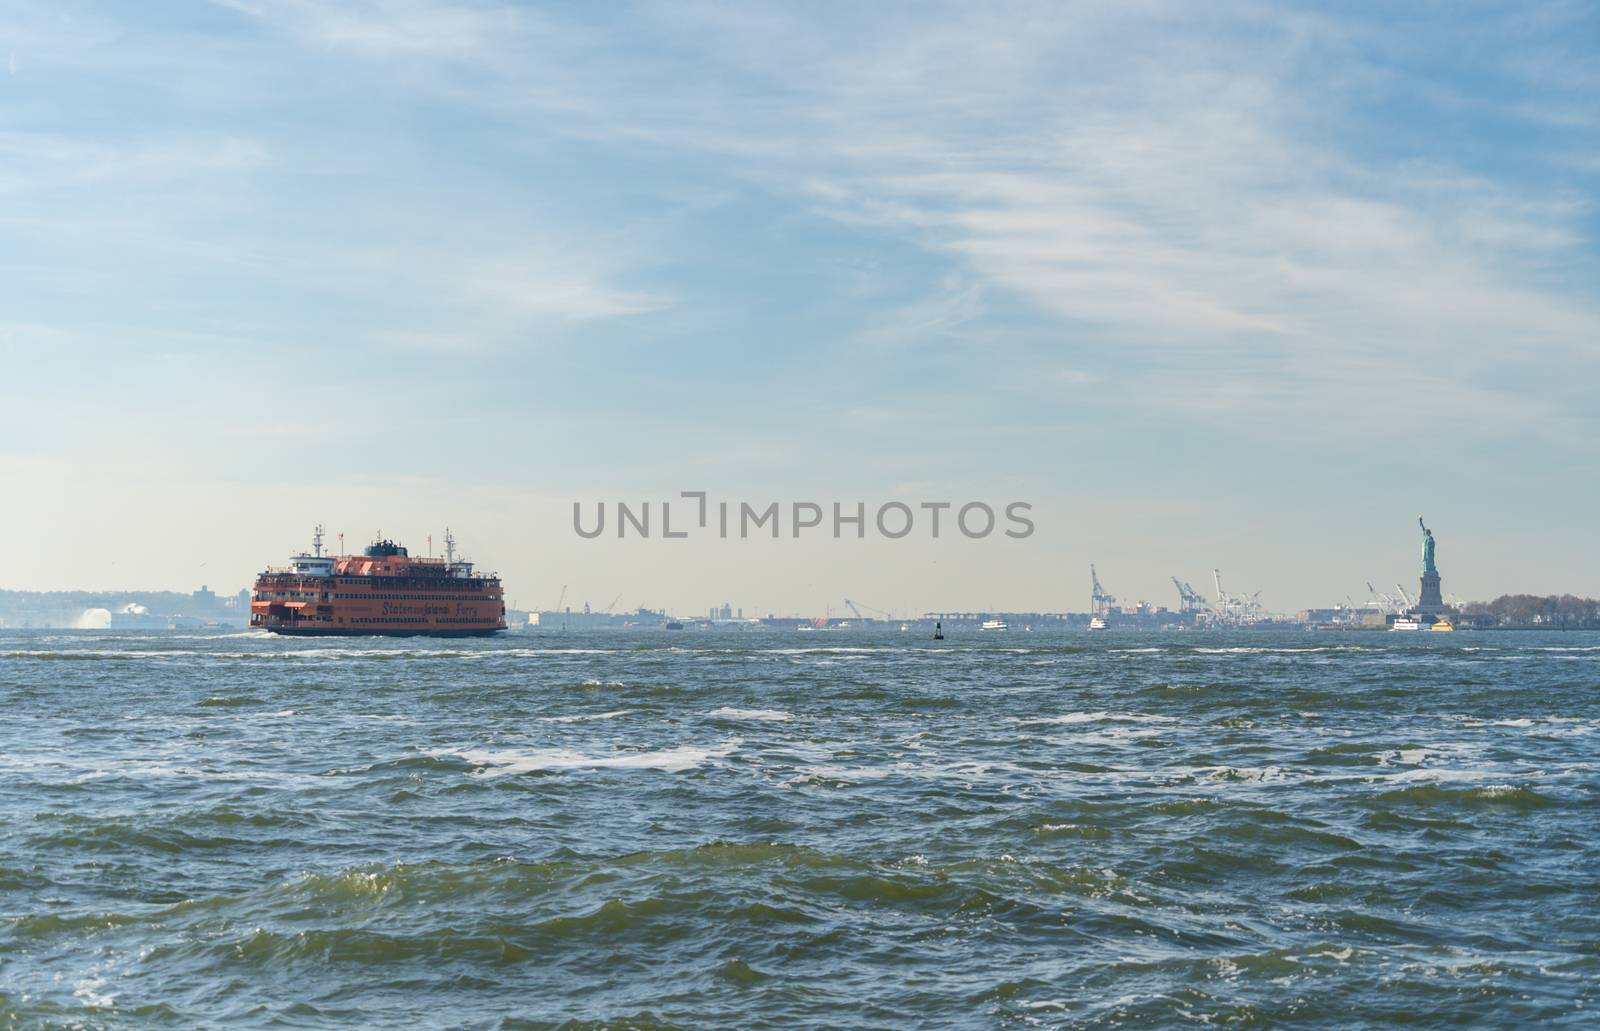 Staten Island Ferry cruises past the Statue of Liberty in New York City, NY by tanaonte